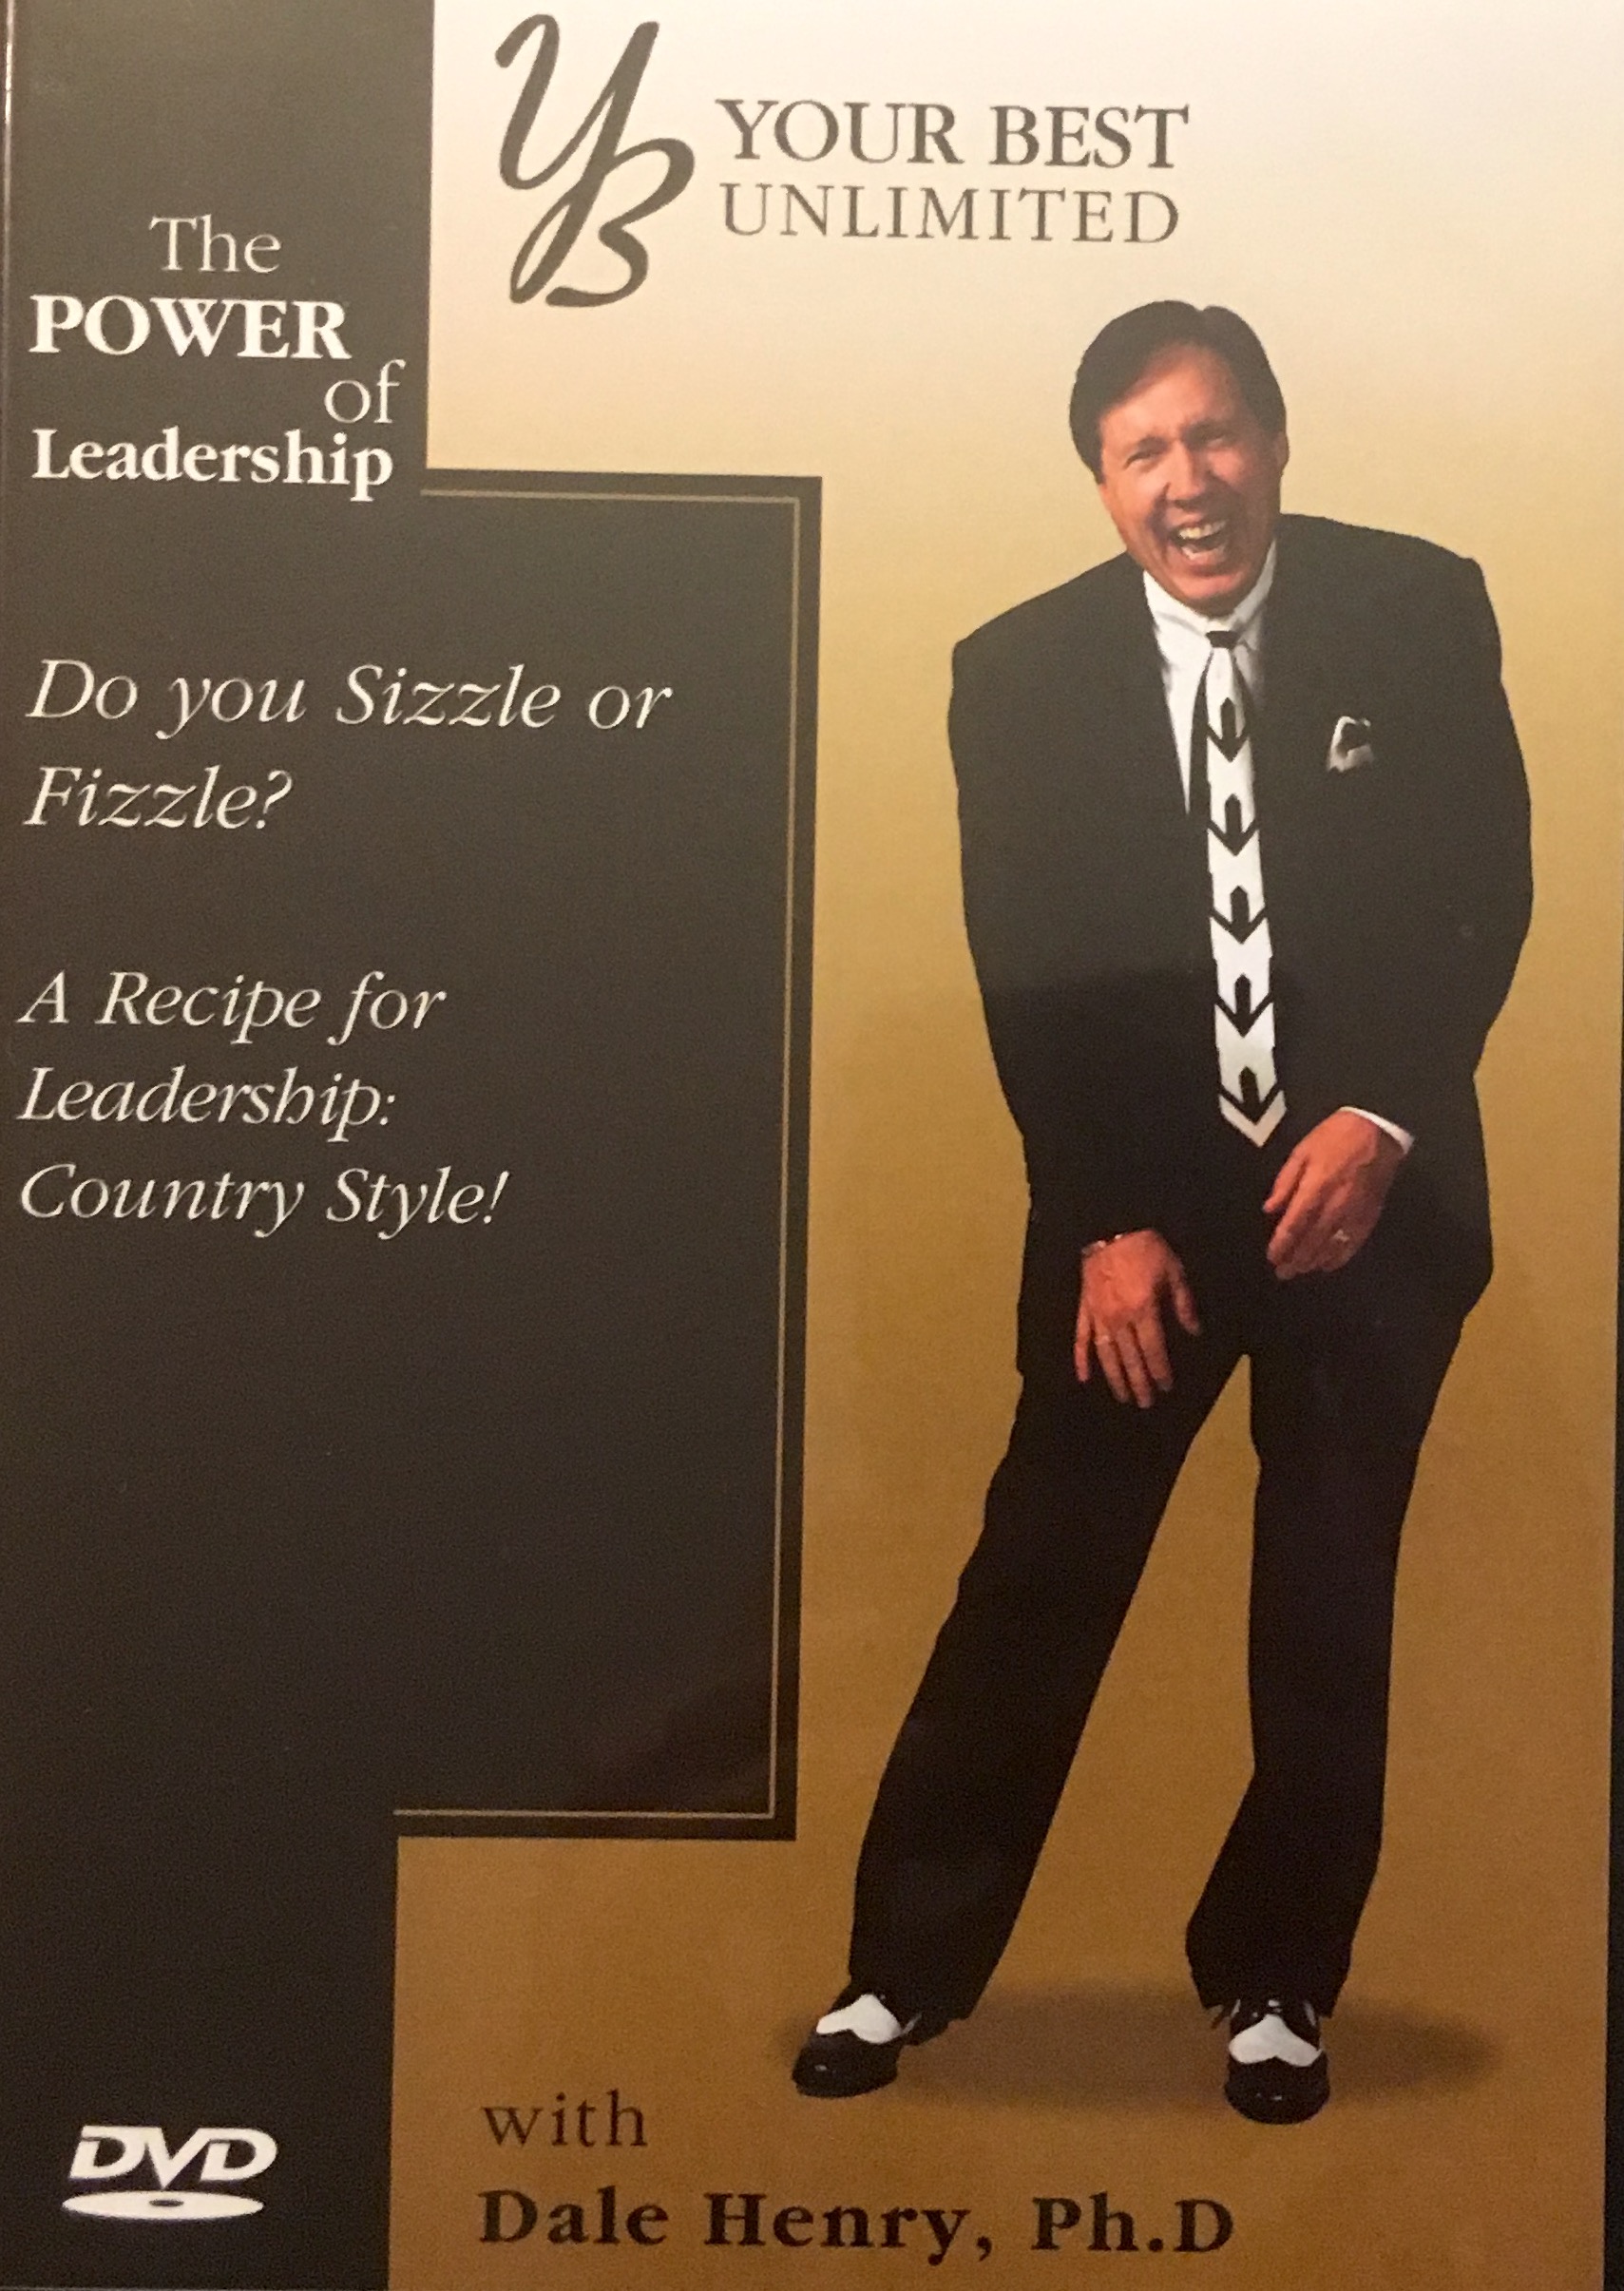 Dr. Dale The Power of Leadership DVD